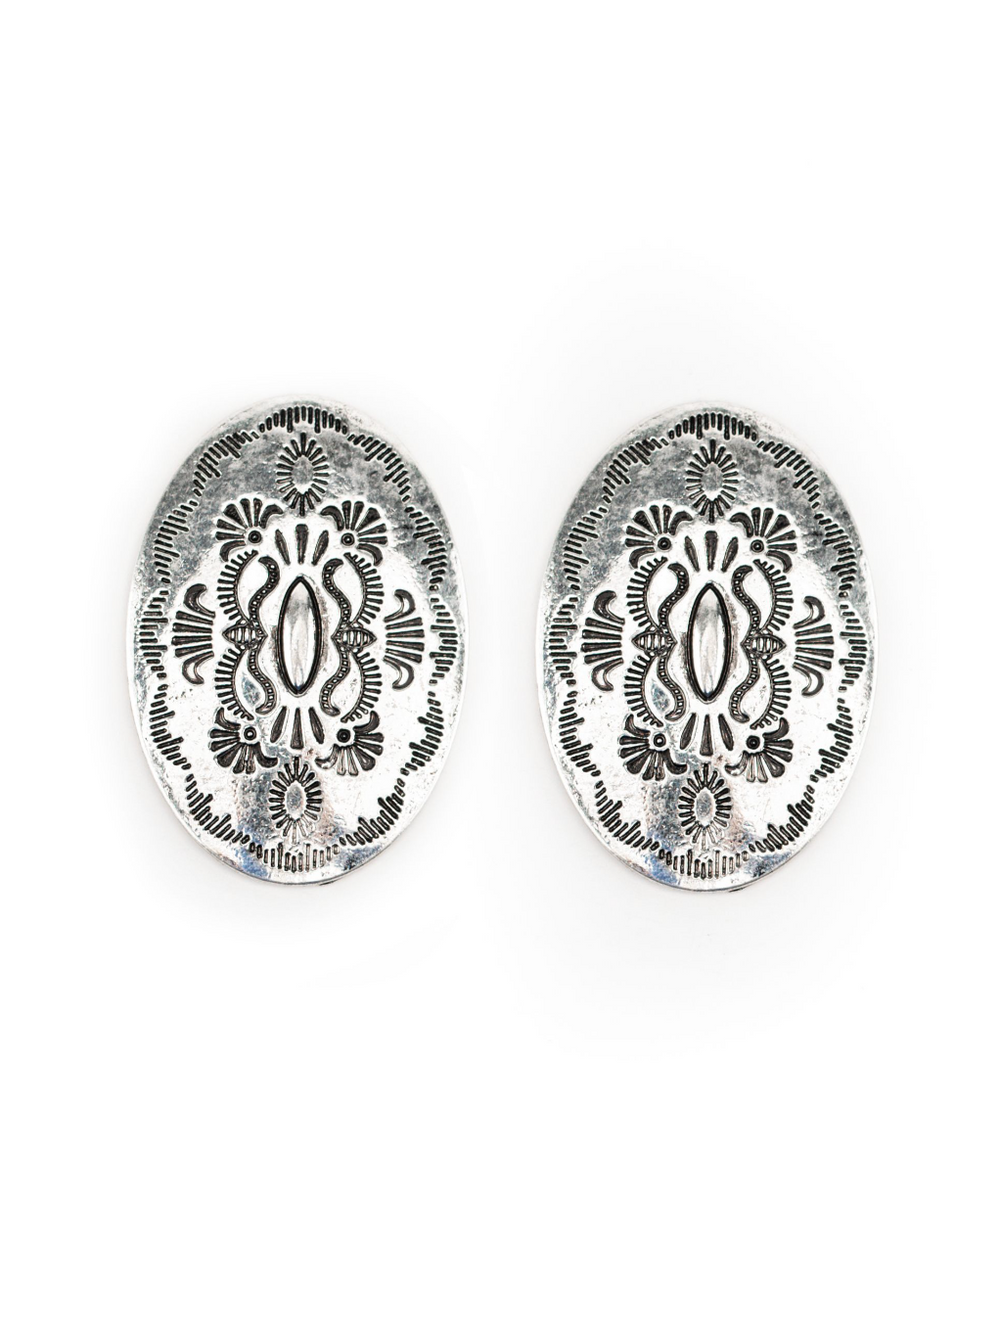 1.5" Oval Burnished Silver Stamped Post Earrings